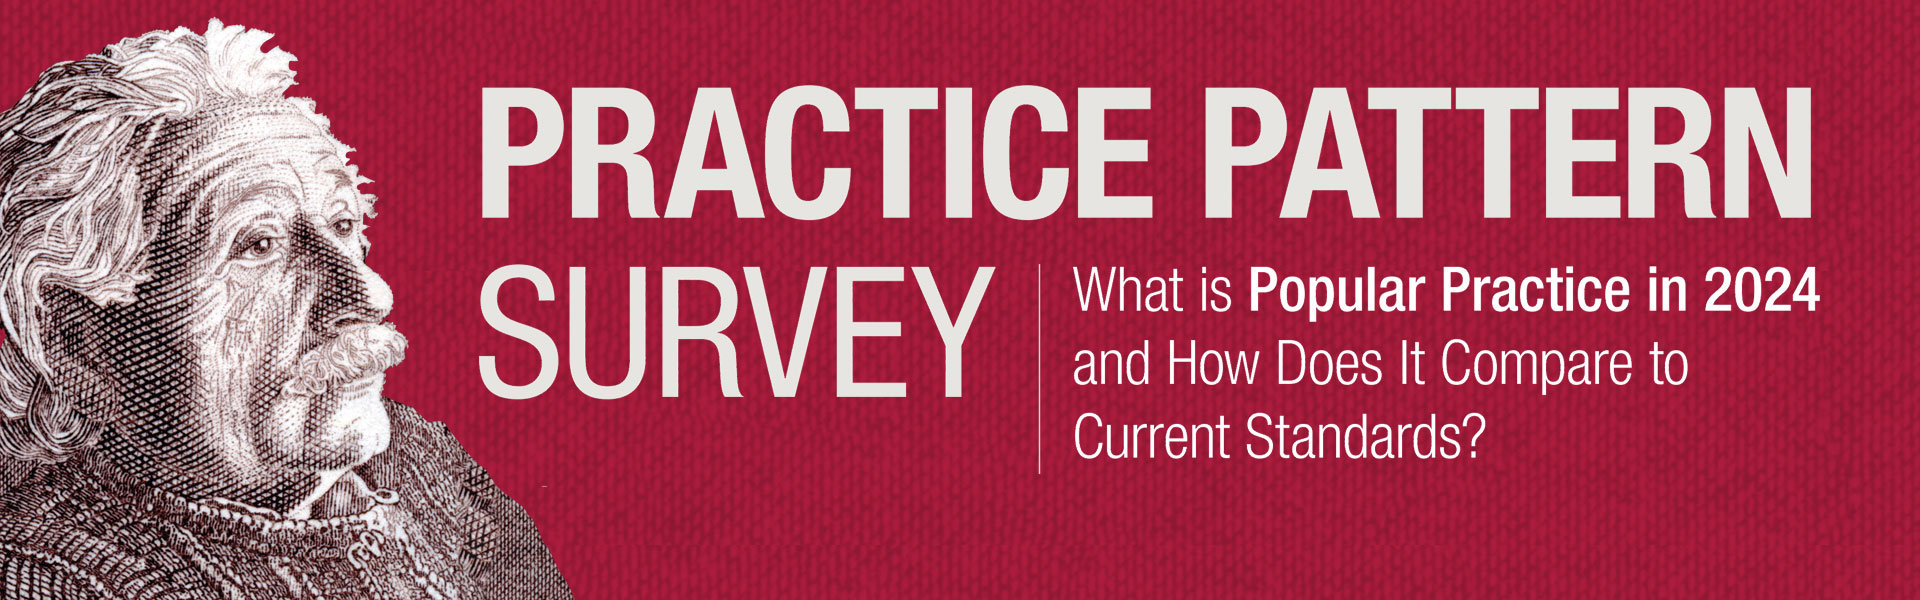 Practice Pattern Survey: What is Popular Practice in 2024 and How Does It Compare to Current Standards?